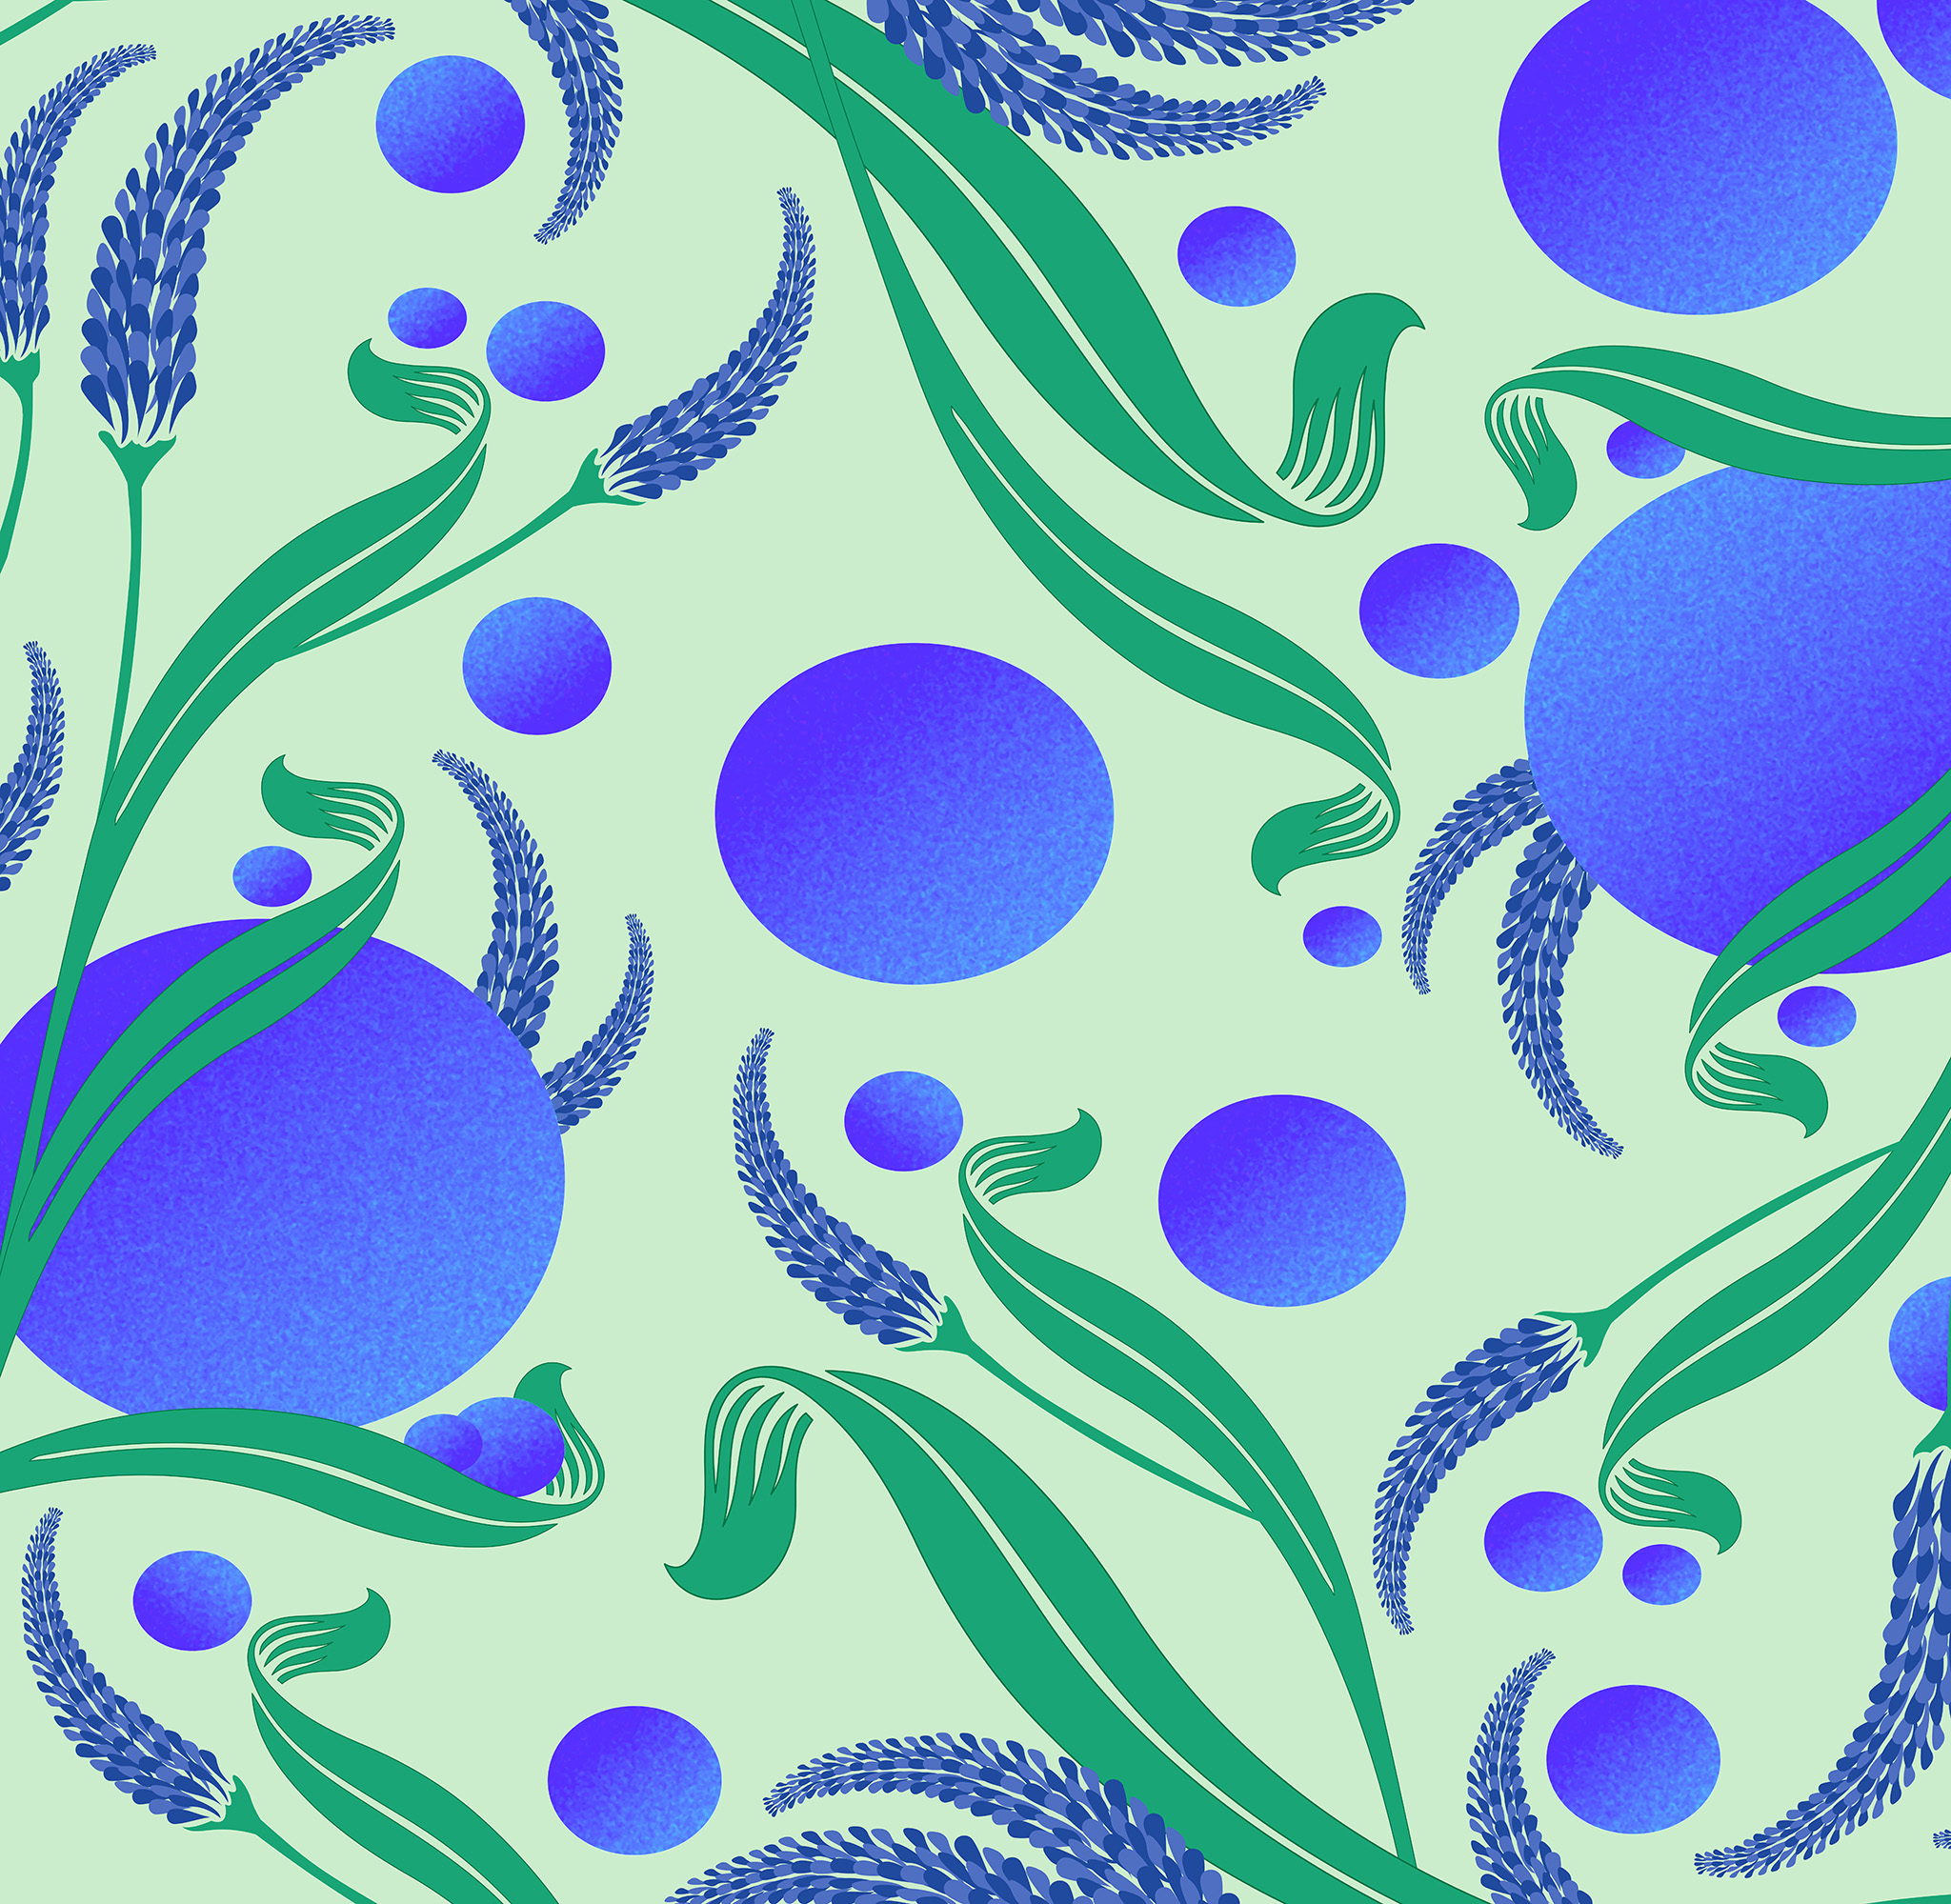 An illustrated pattern. Illustrations of blueberries and lavender on a light green background with small plants and leaves.